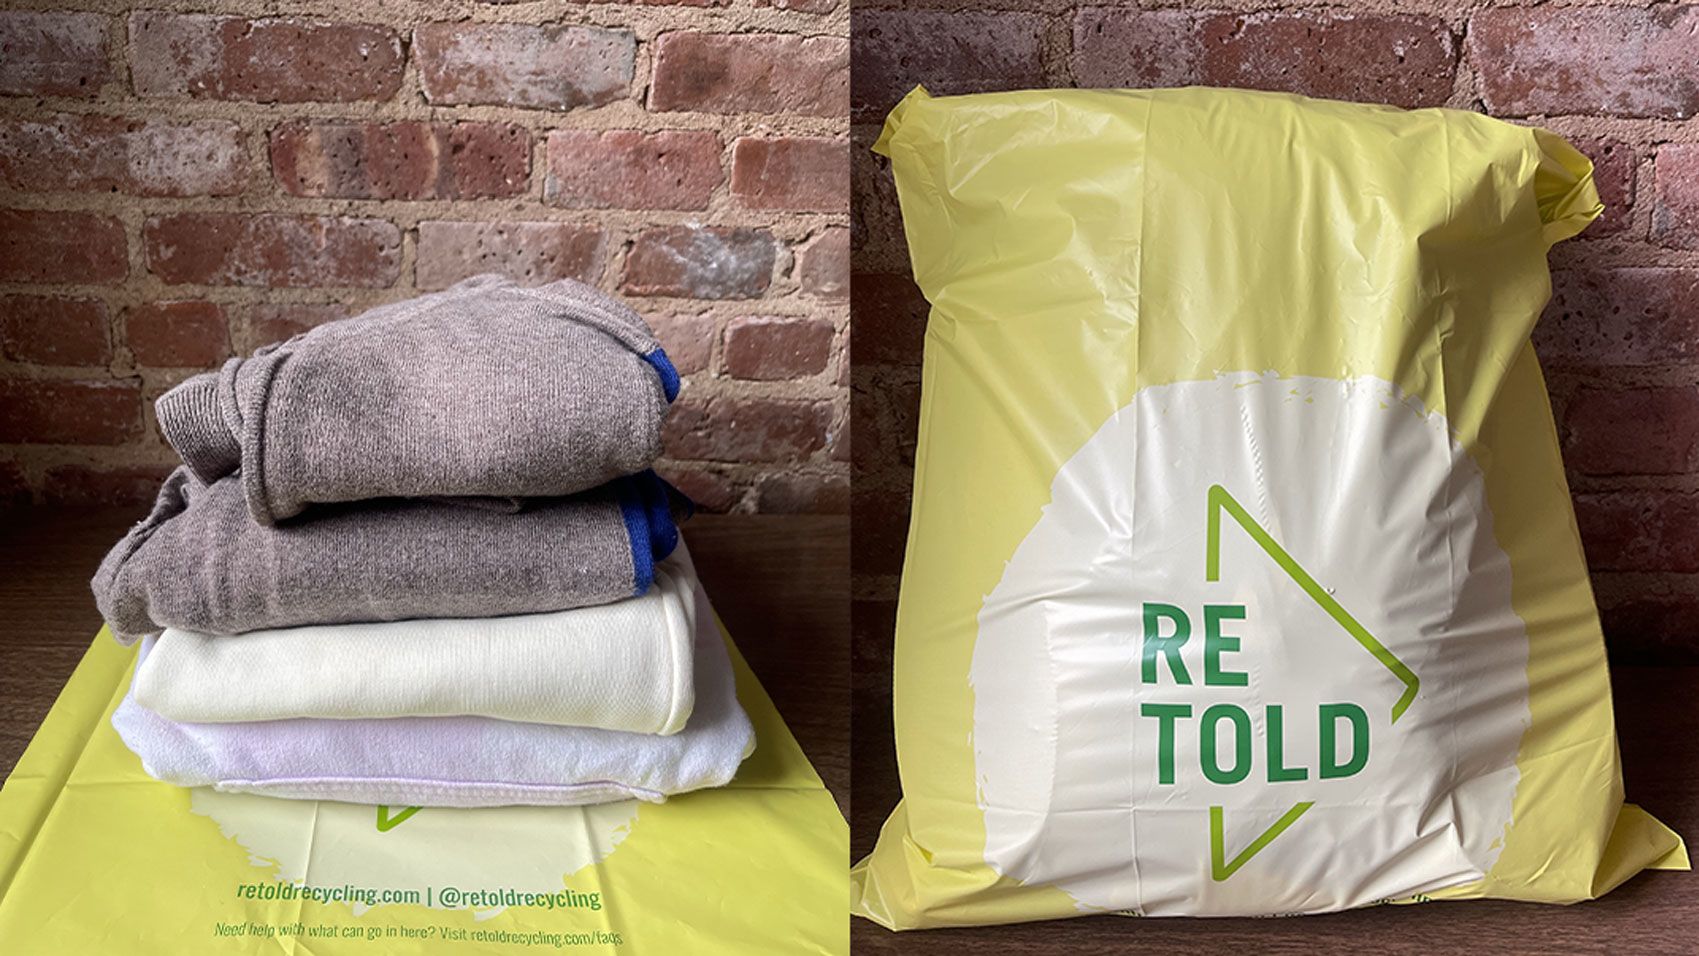 Retold Recycling awarded $300,000 - Advanced Textiles Association